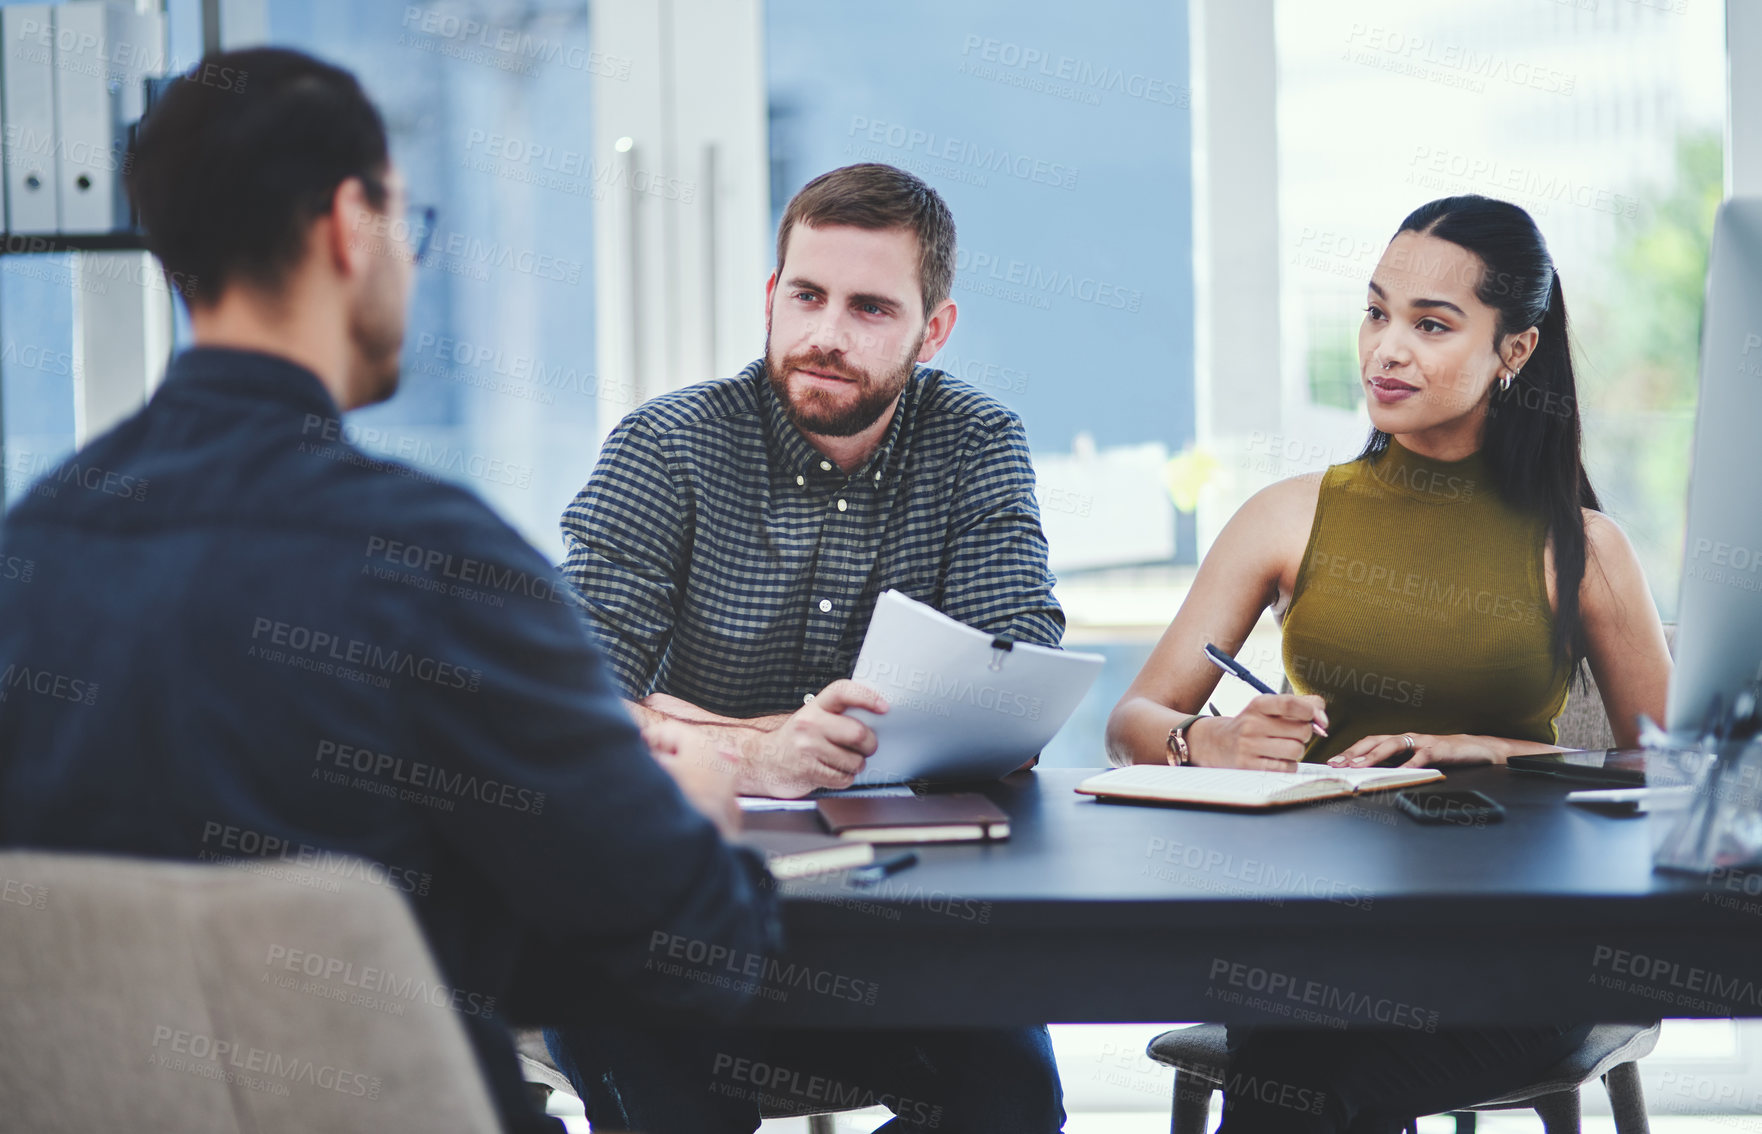 Buy stock photo Shot of a group of young designers having a discussion in an office